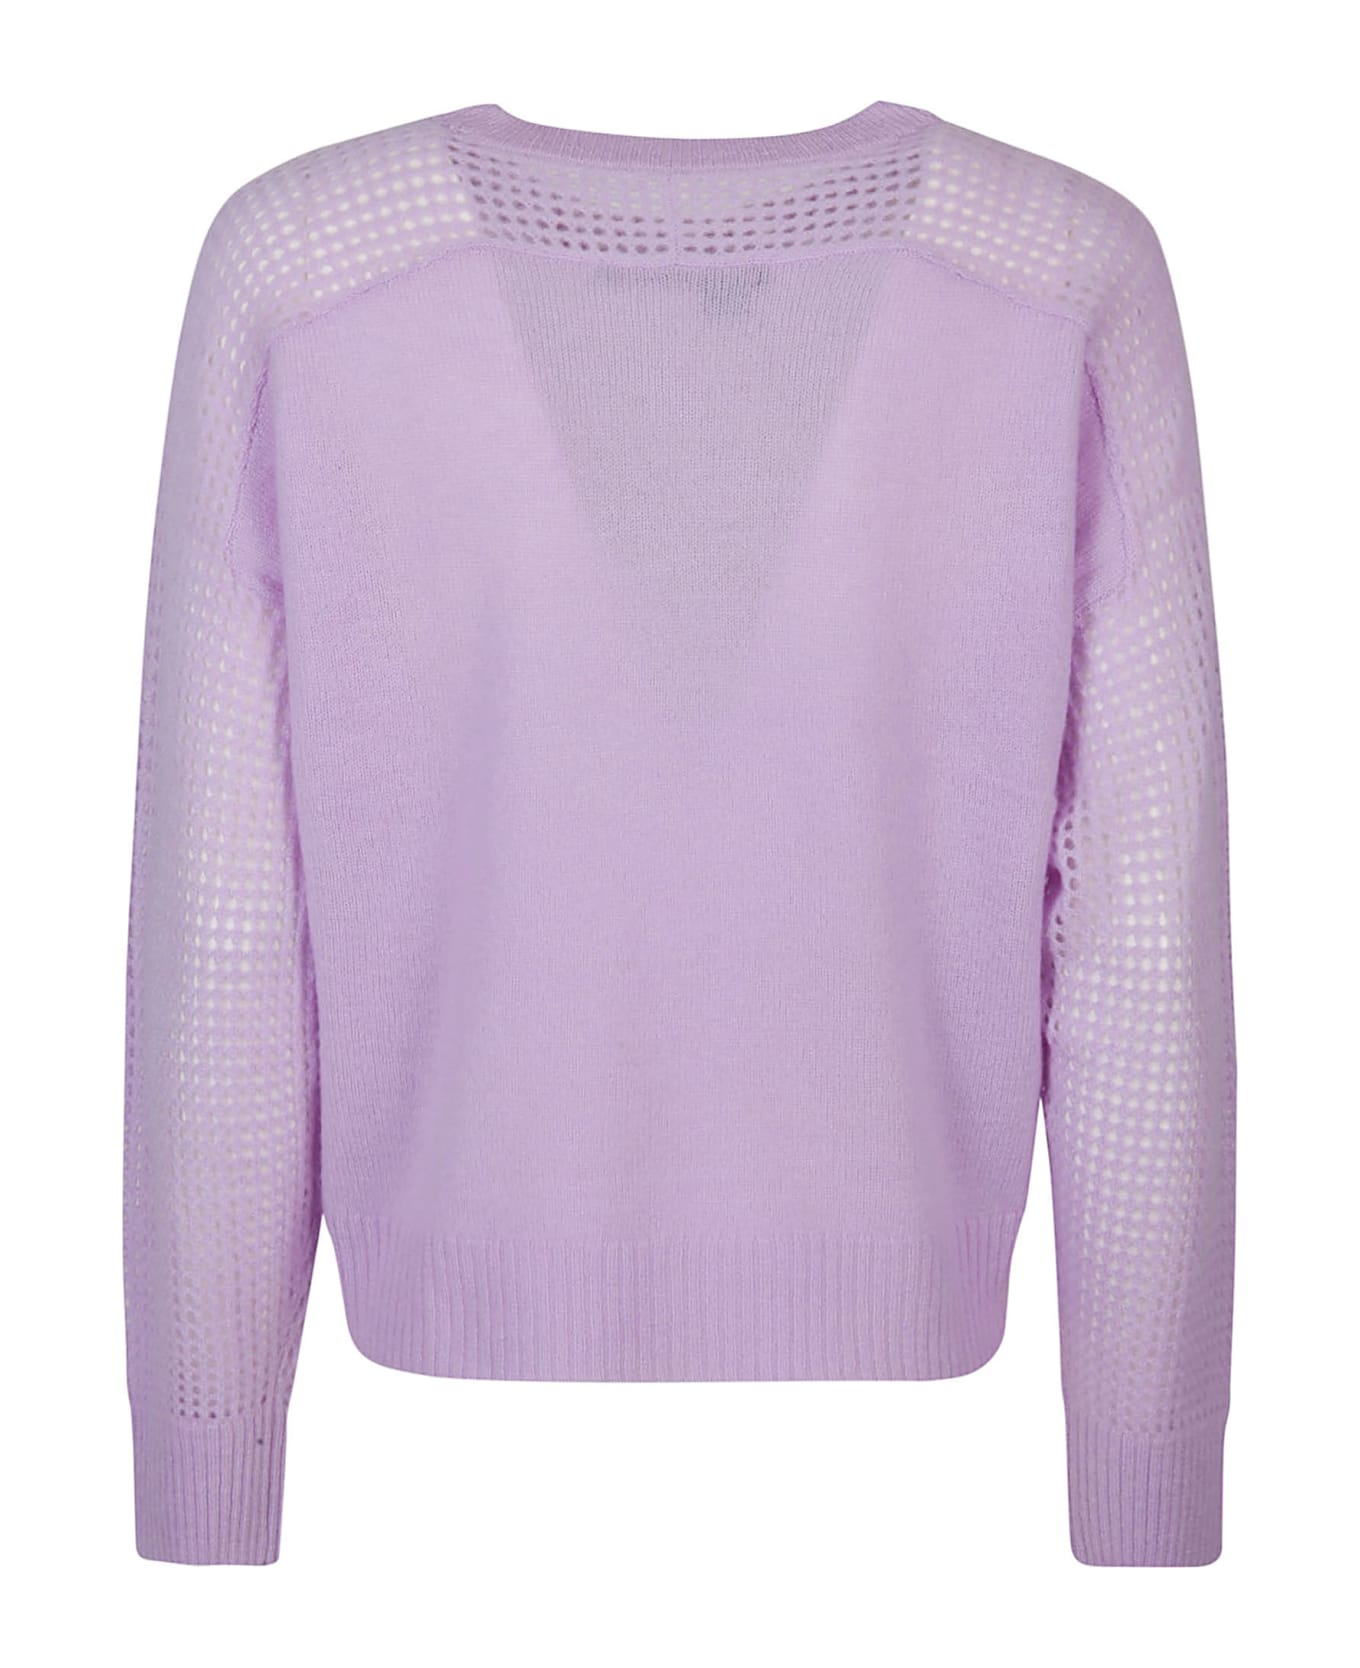 360Cashmere Riley Round Neck Sweater - Orchid ニットウェア